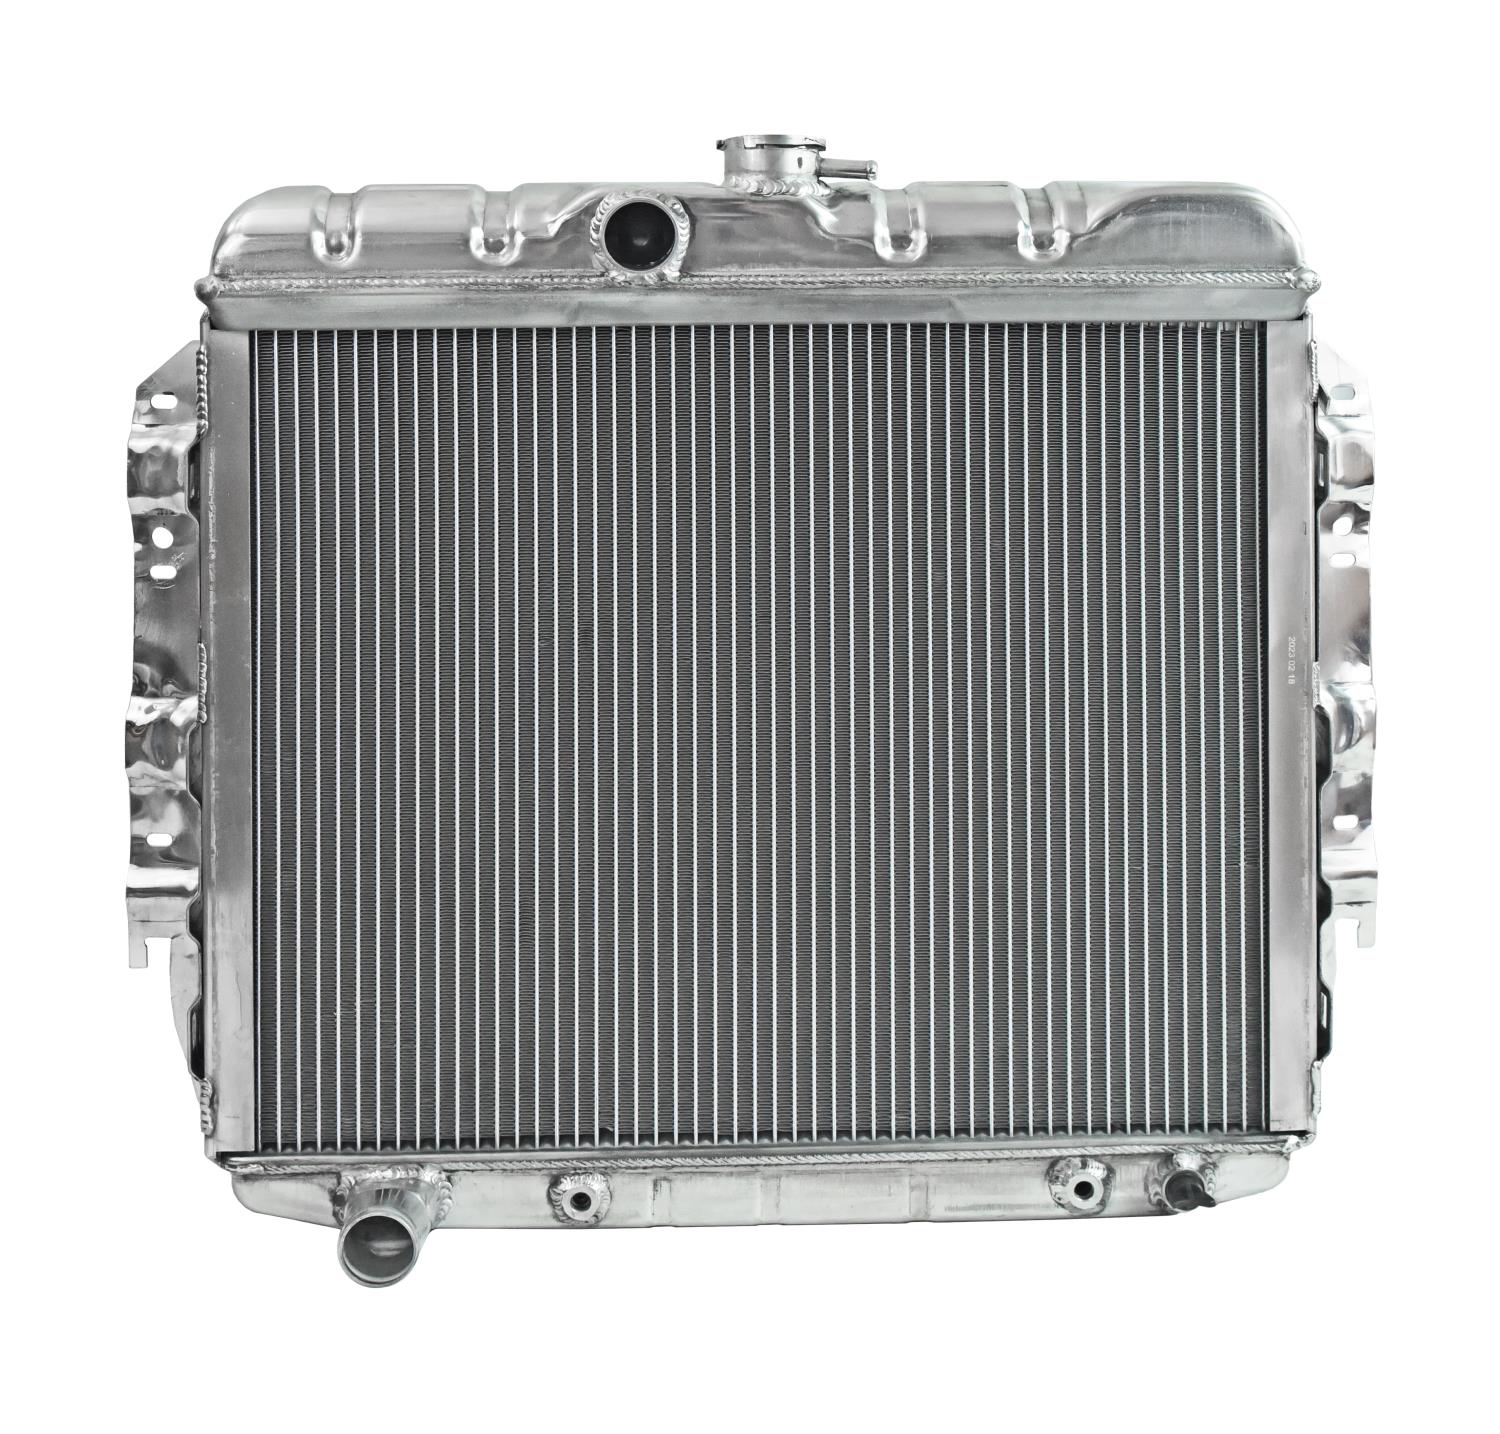 Reproduction Aluminum Radiator for Select 1965-1966 Mopar A Bodies With Small Block Engines